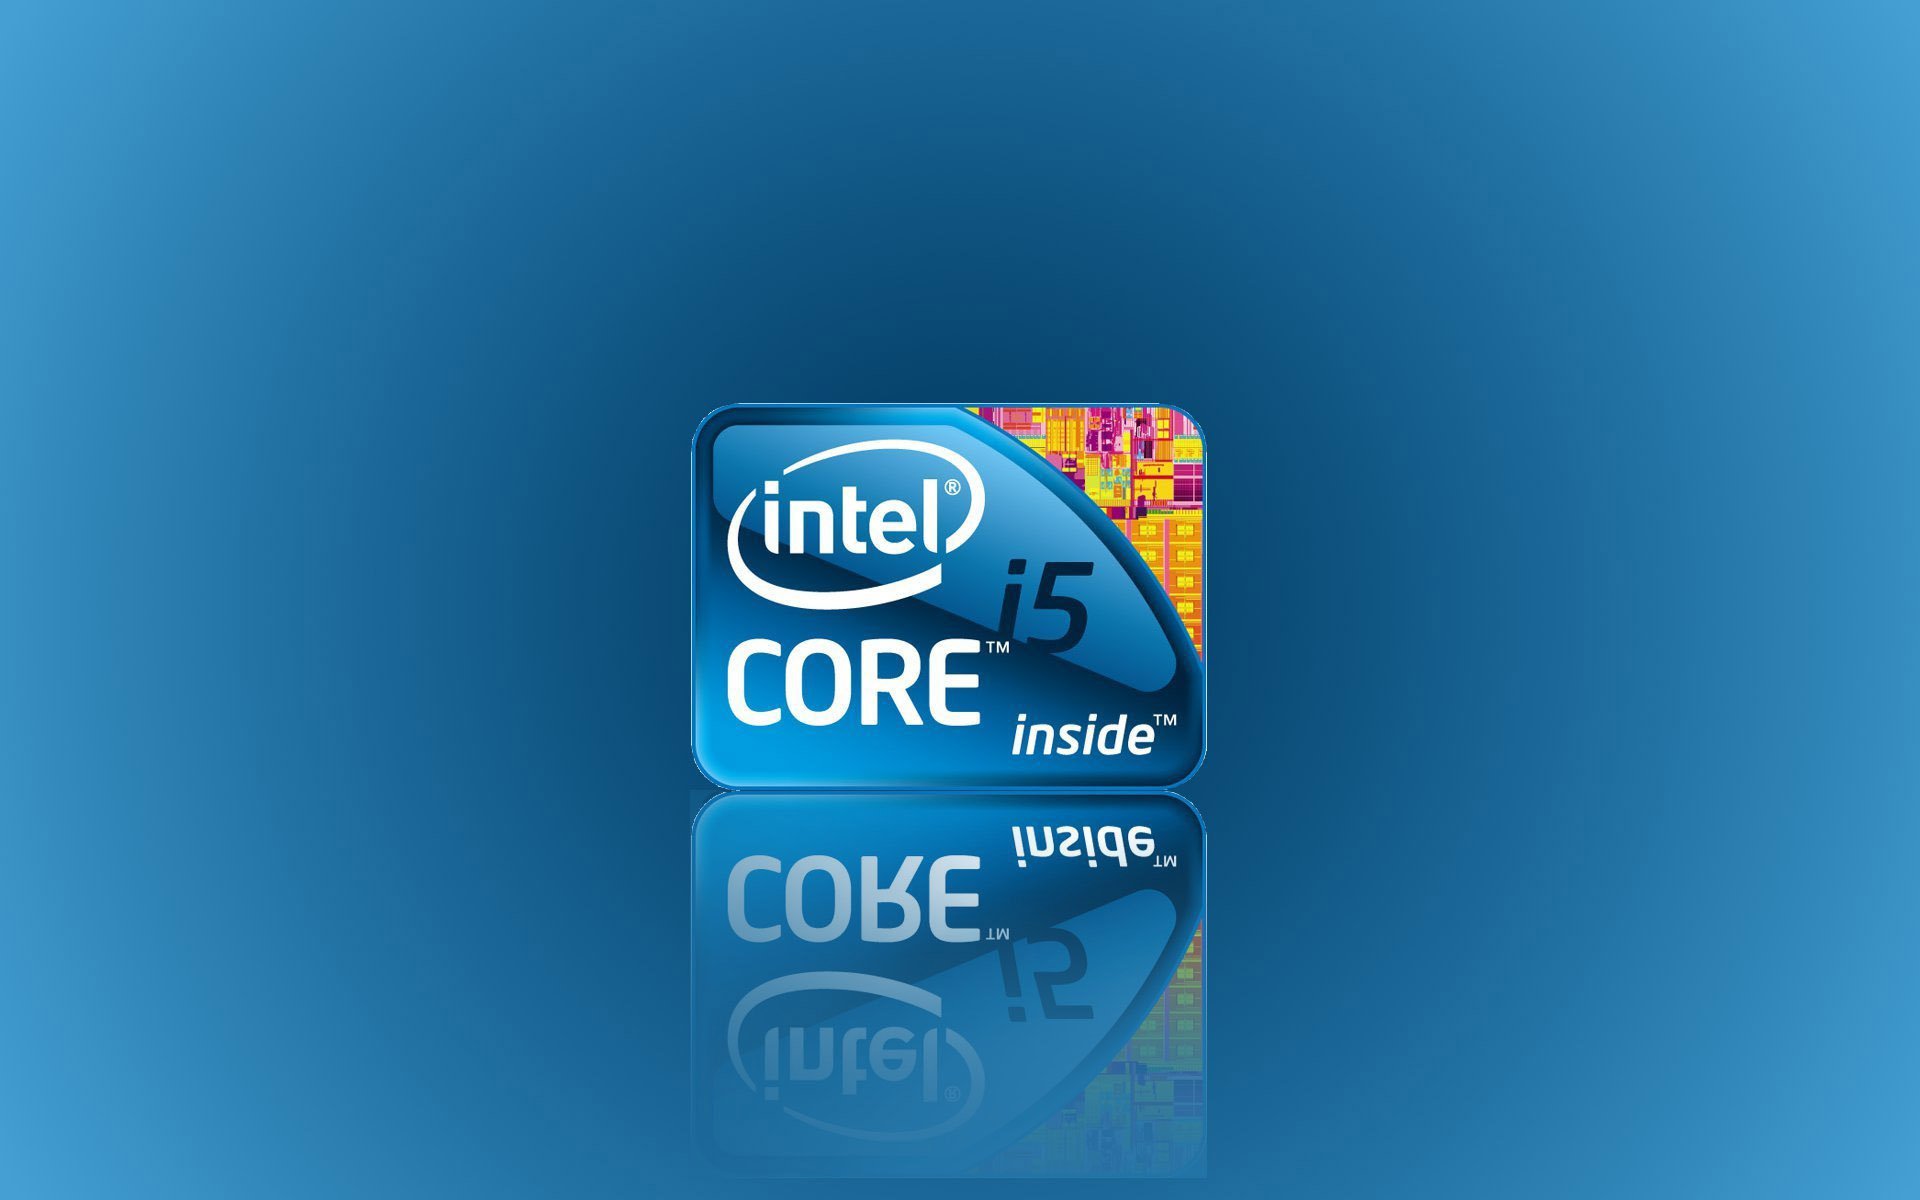 Intel Logo Wallpapers   Daily Backgrounds in HD